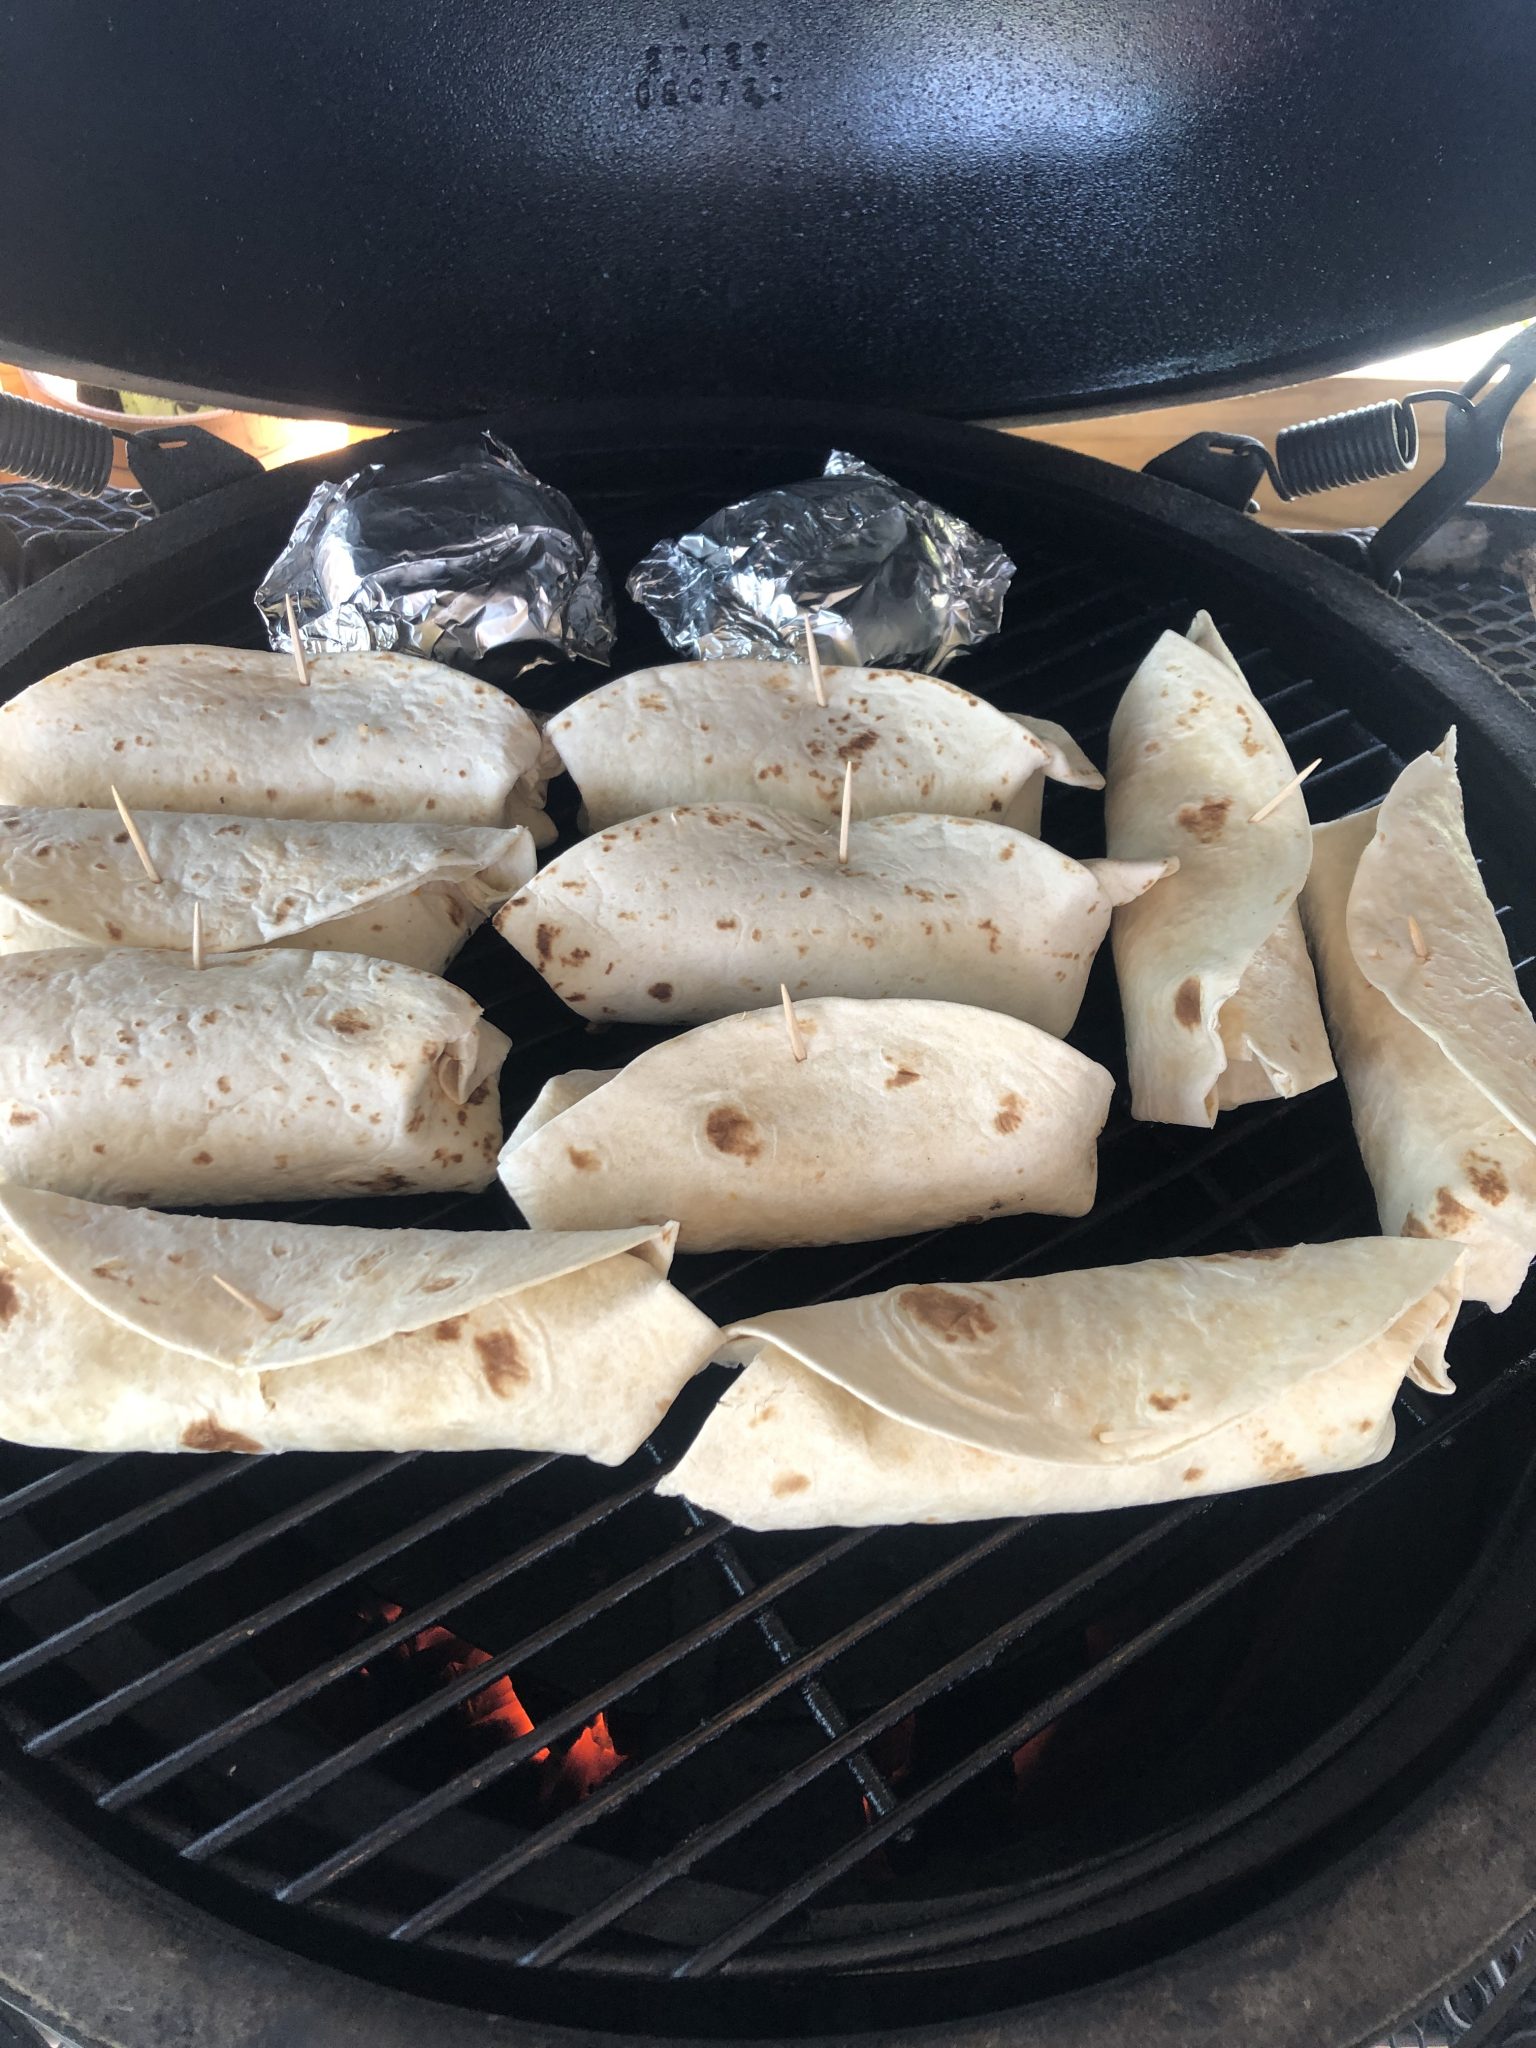 Burritos on a grill